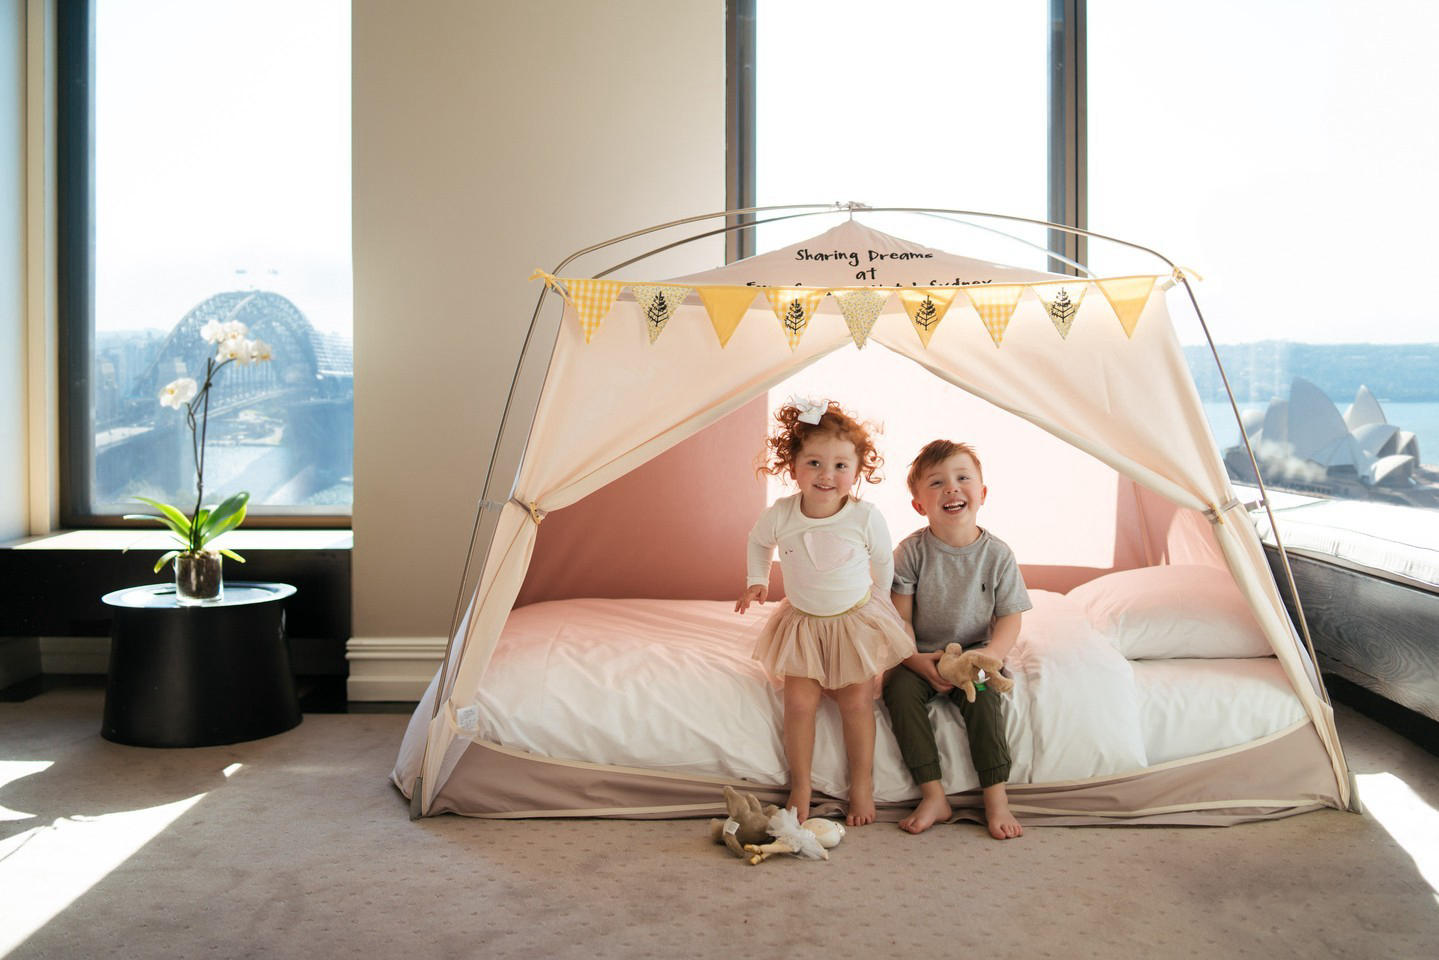 Four Seasons Hotel Sydney - The Best Family-Friendly Hotels In Sydney With Perks For Kids by #UrbanL